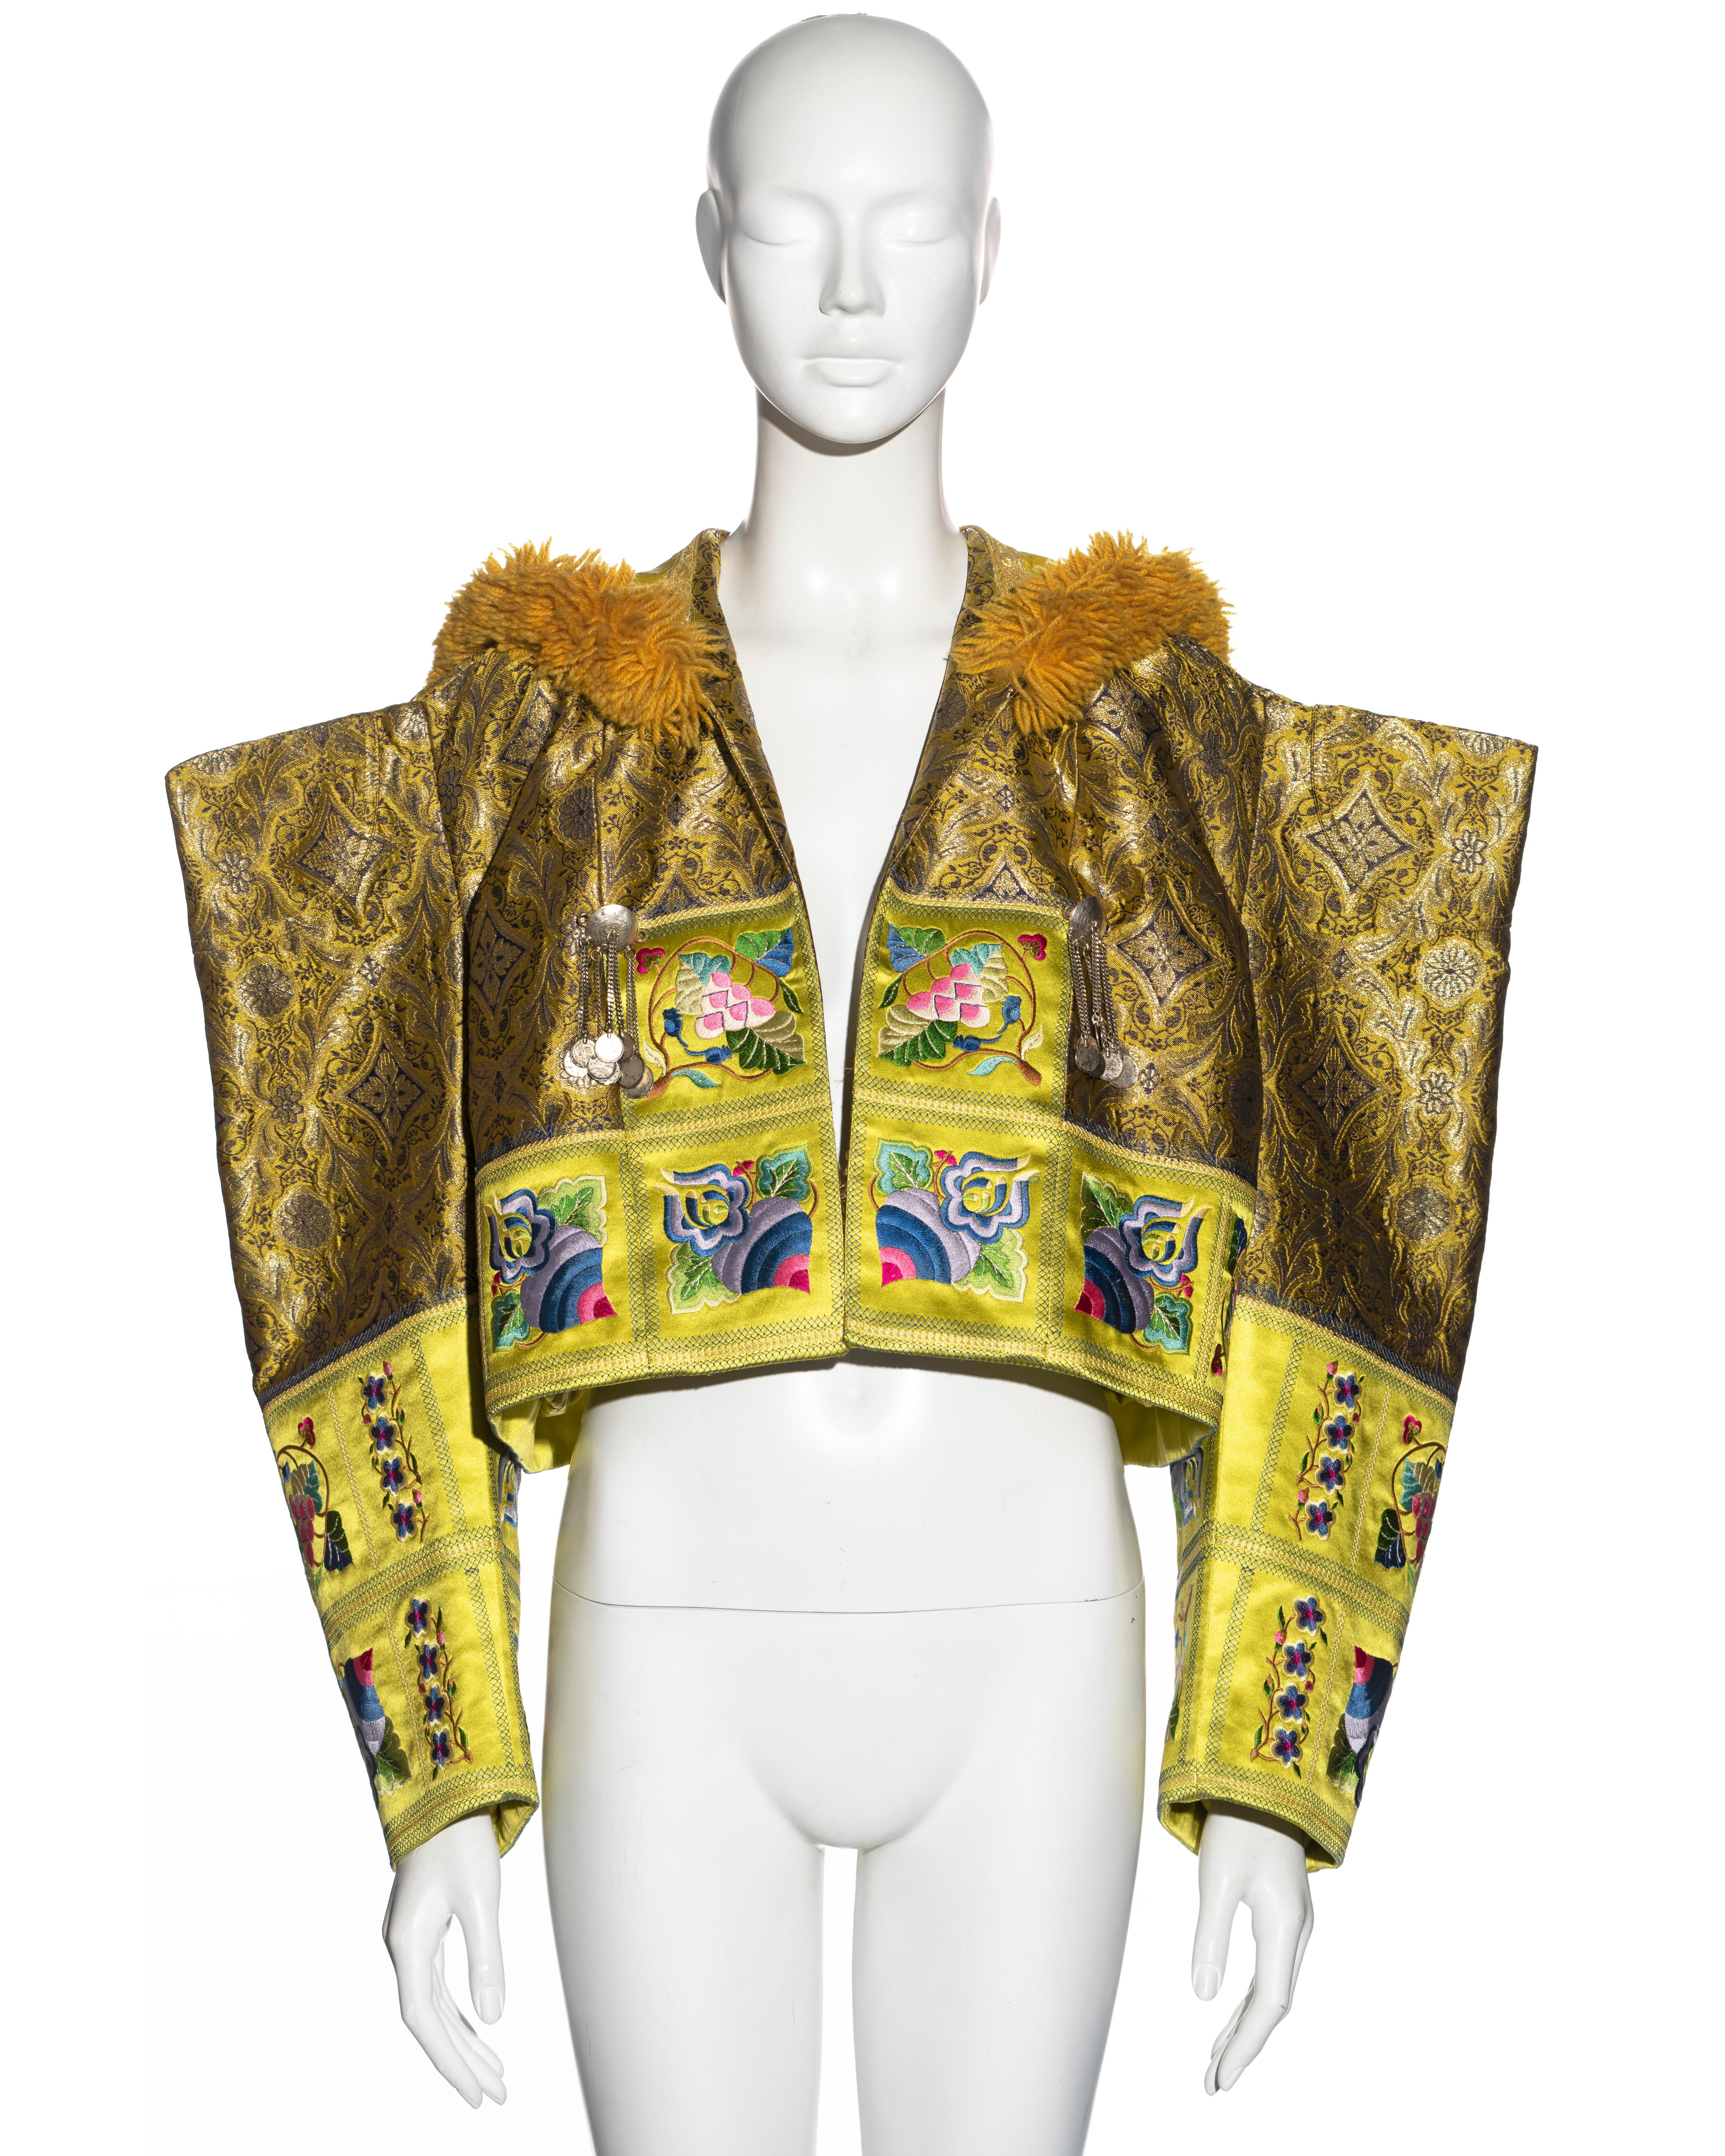 ▪ Christian Dior rare showpiece evening jacket 
▪ Designed by John Galliano
▪ Sold by One of a Kind Archive
▪ Constructed from metallic gold silk brocade 
▪ Chartreuse silk trim with large embroidered patterns 
▪ 2 aged-silver pendent brooches 
▪